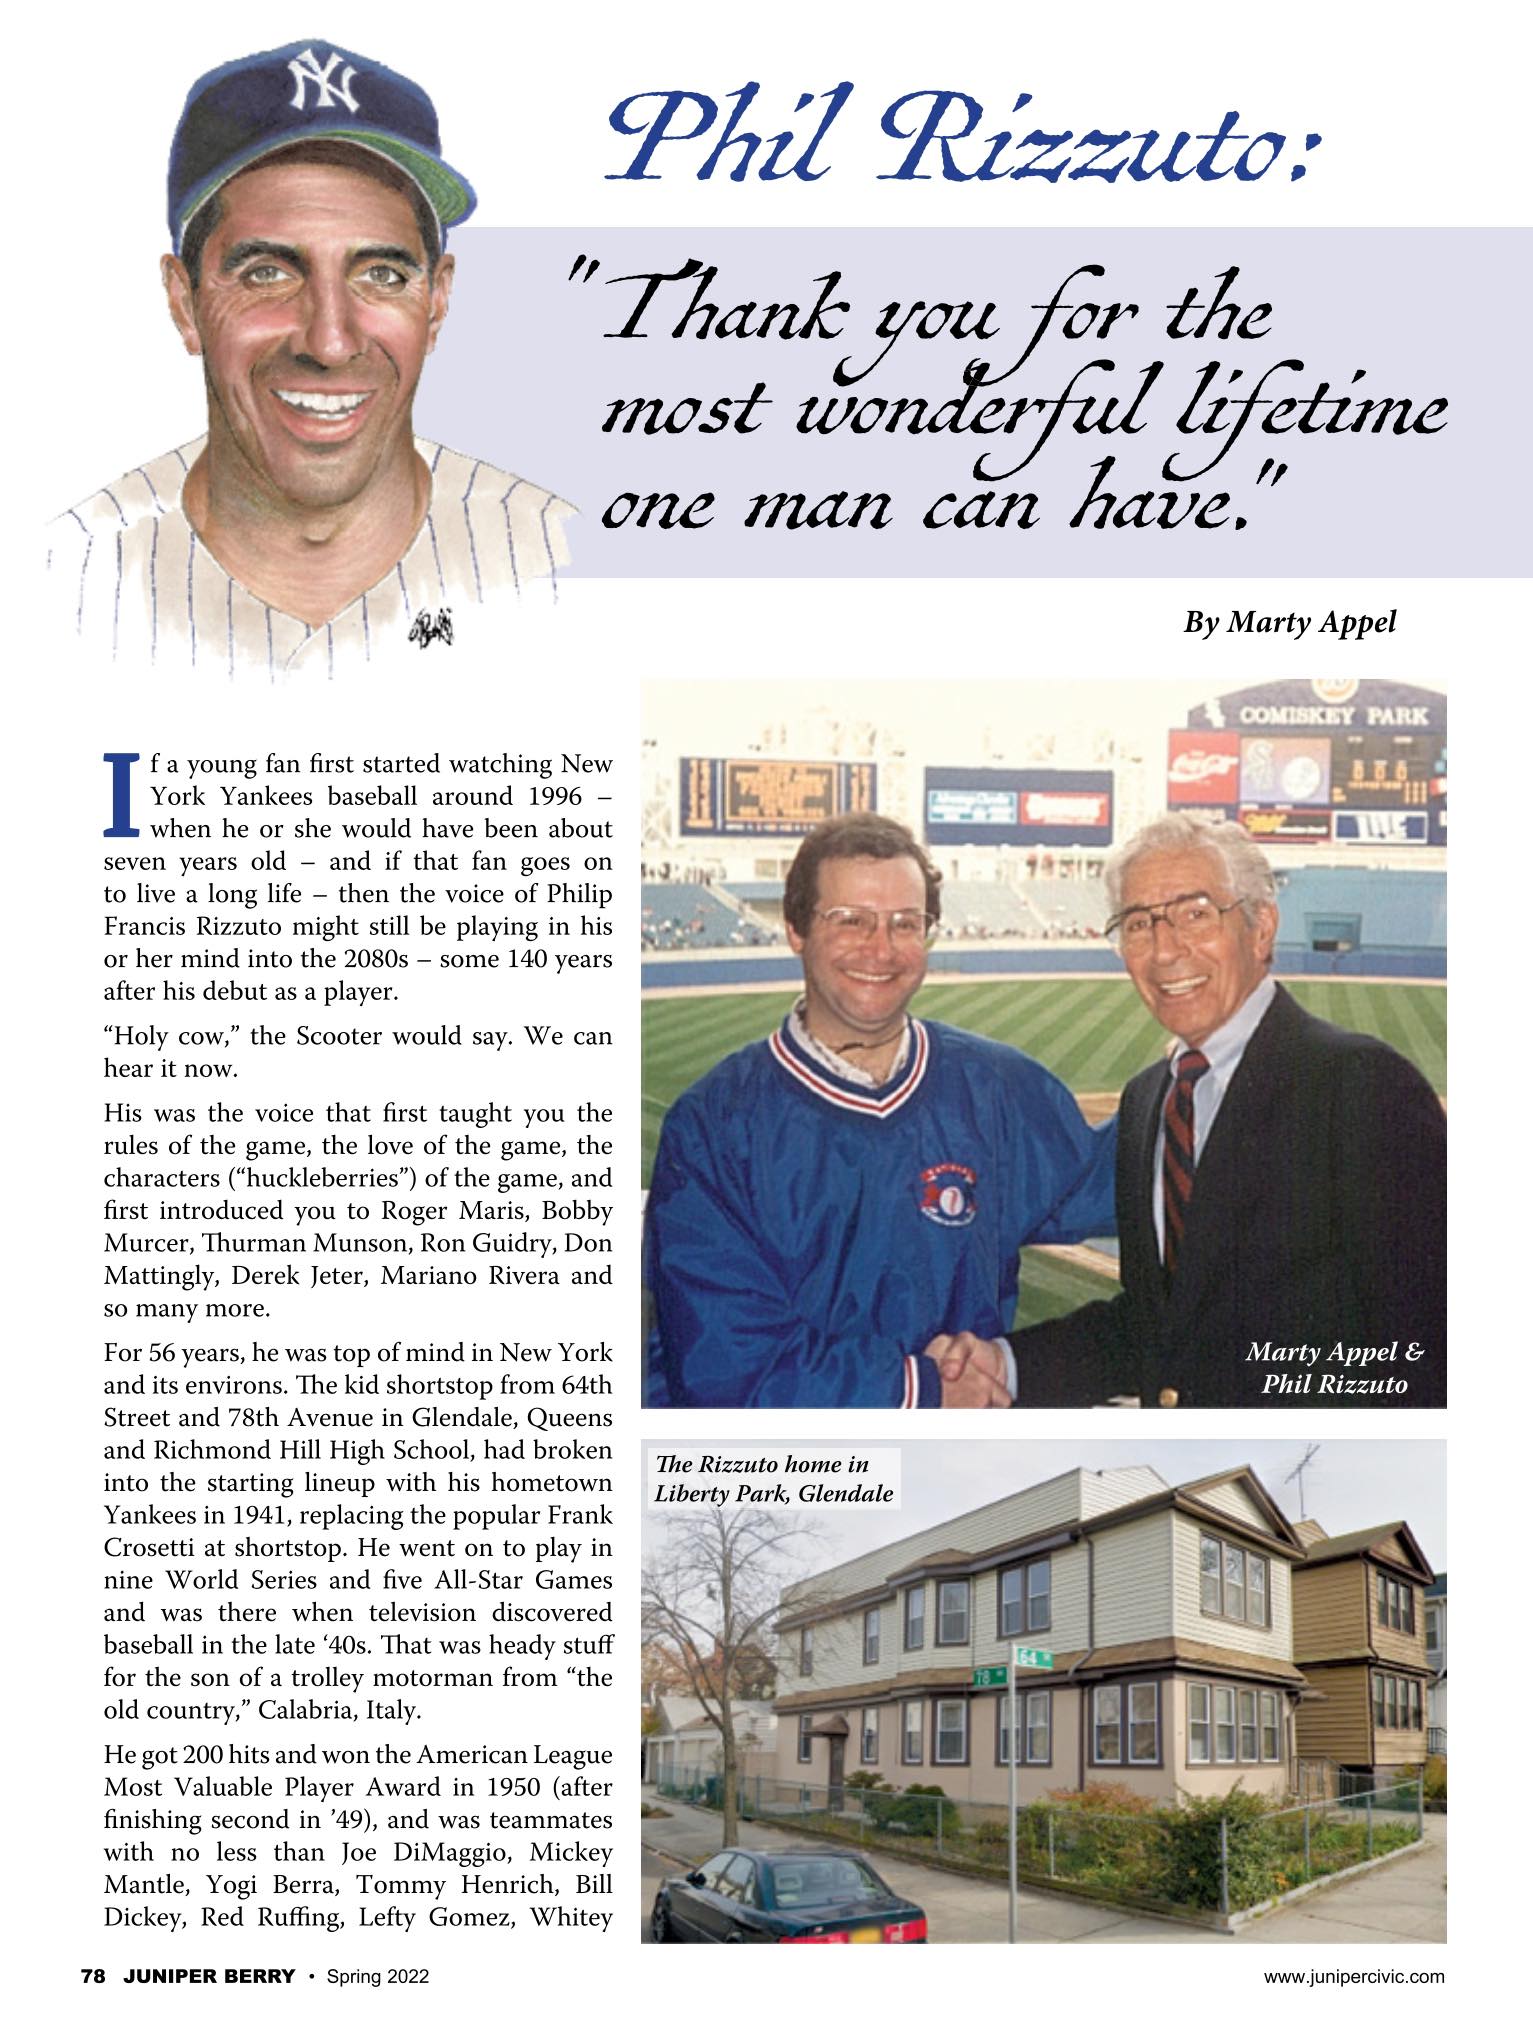 Phil Rizzuto: Thank you for the most wonderful lifetime one man